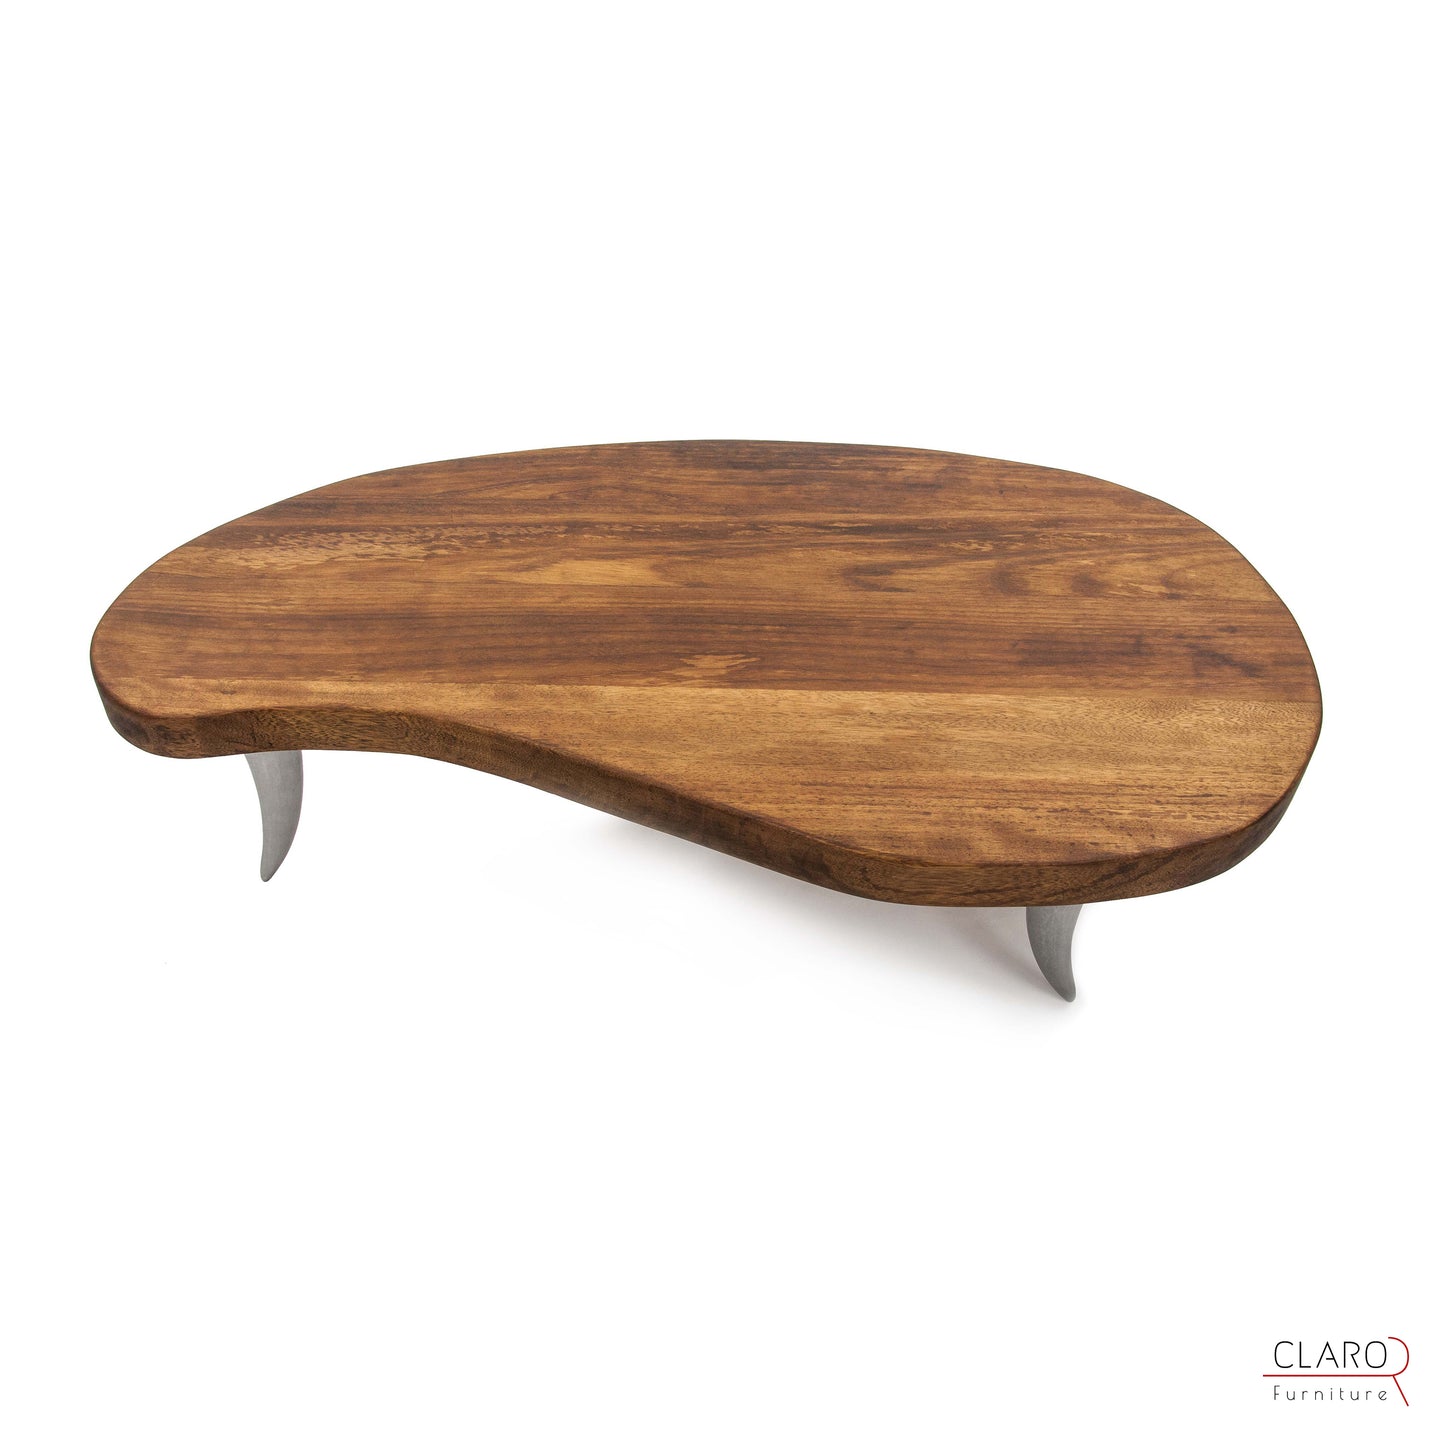 Solid Iroko Wood Coffee Table with Cast Aluminum Legs